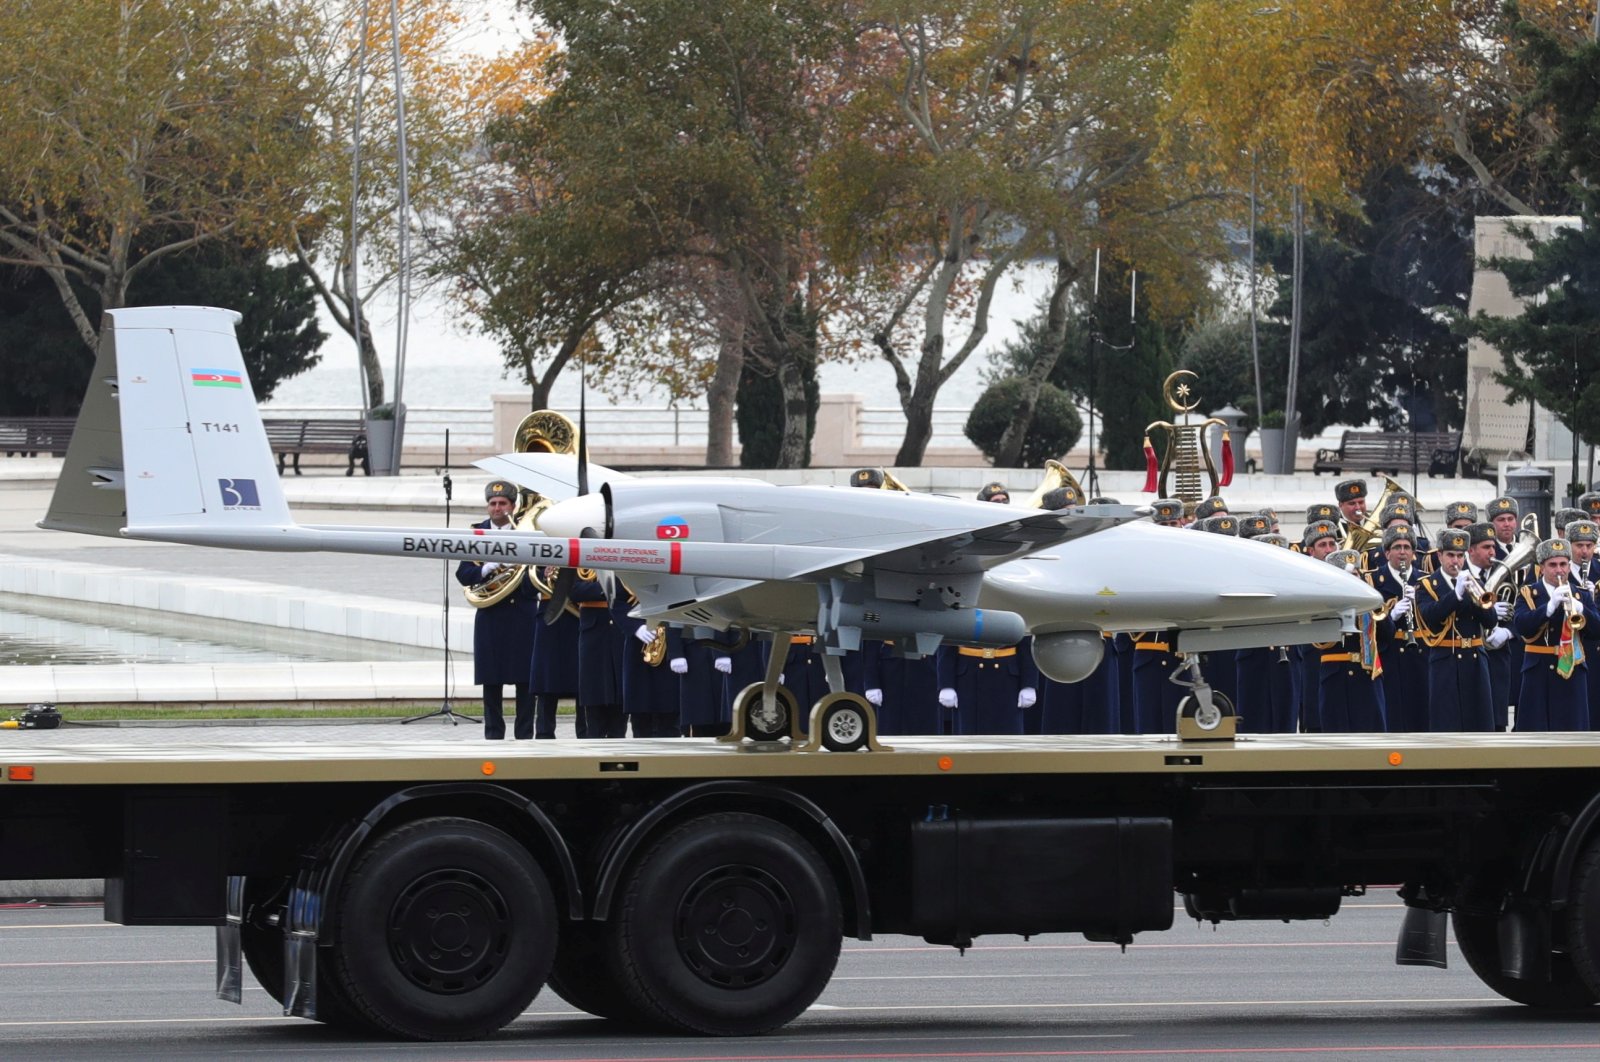 An Azerbaijan army Bayraktar TB2, a medium-altitude, long-endurance unmanned combat aerial vehicle, is displayed during a military parade to mark the victory in the Nagorno-Karabakh conflict, in Baku, Azerbaijan, Dec. 10, 2020. (Turkish Presidential Press Office / Handout via Reuters)